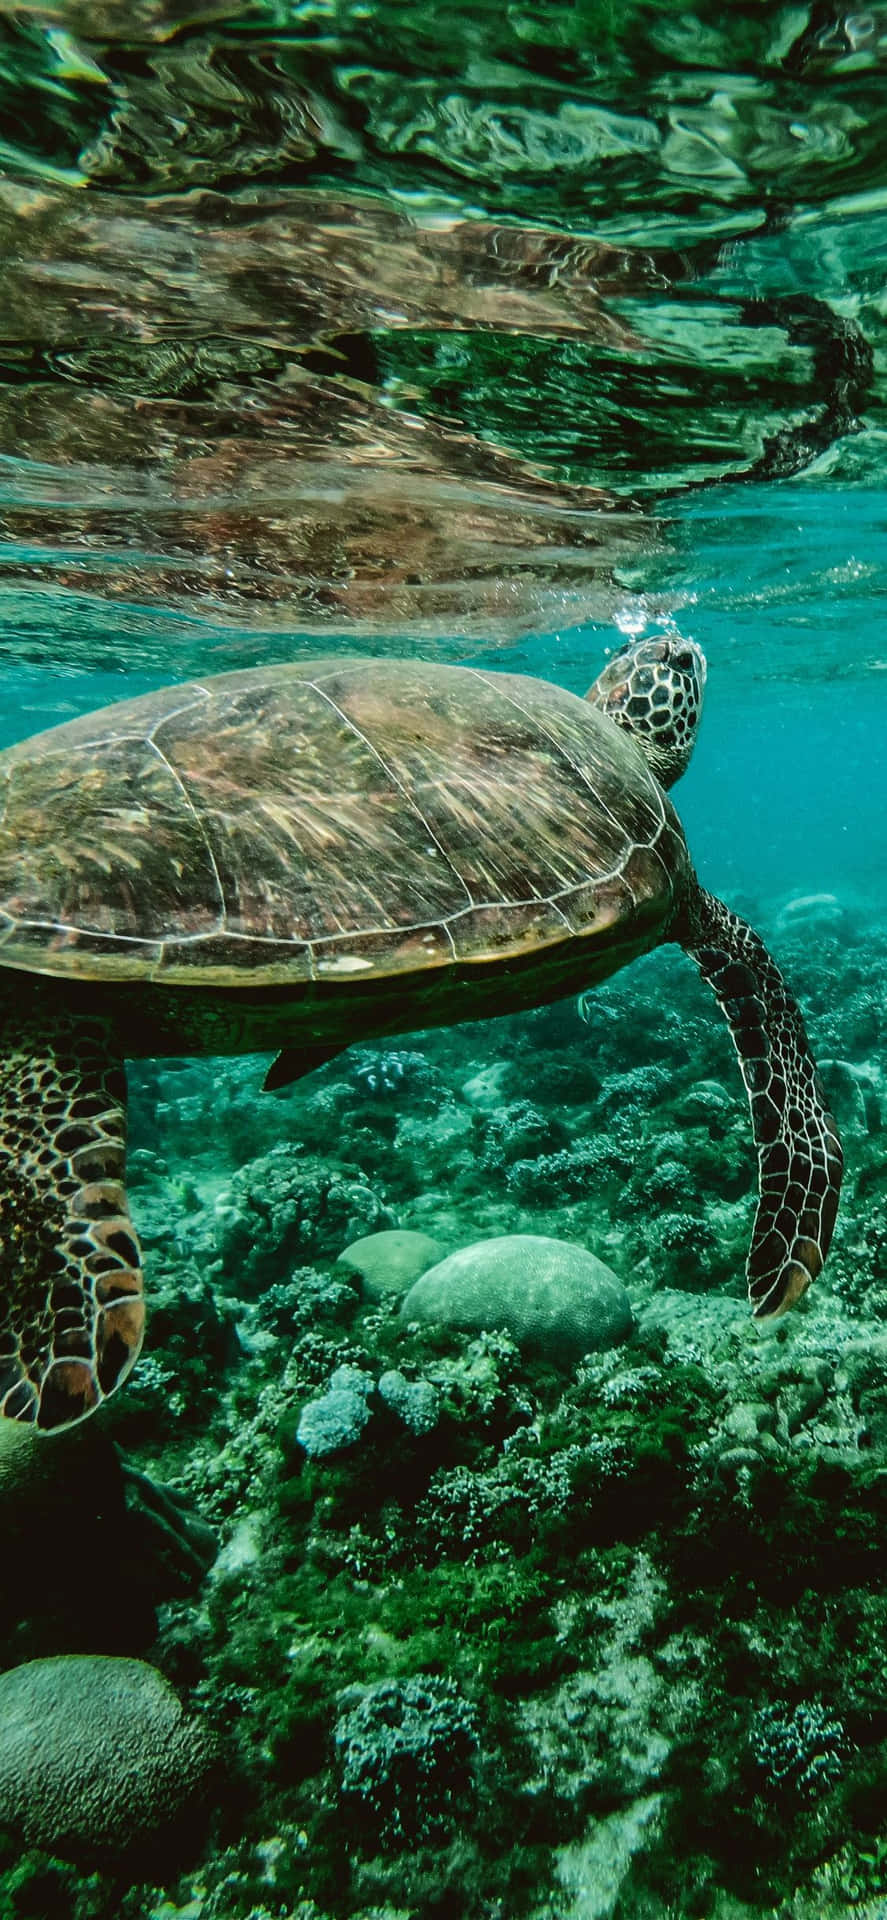 A green sea turtle swims in the clear waters of an ocean - Sea turtle